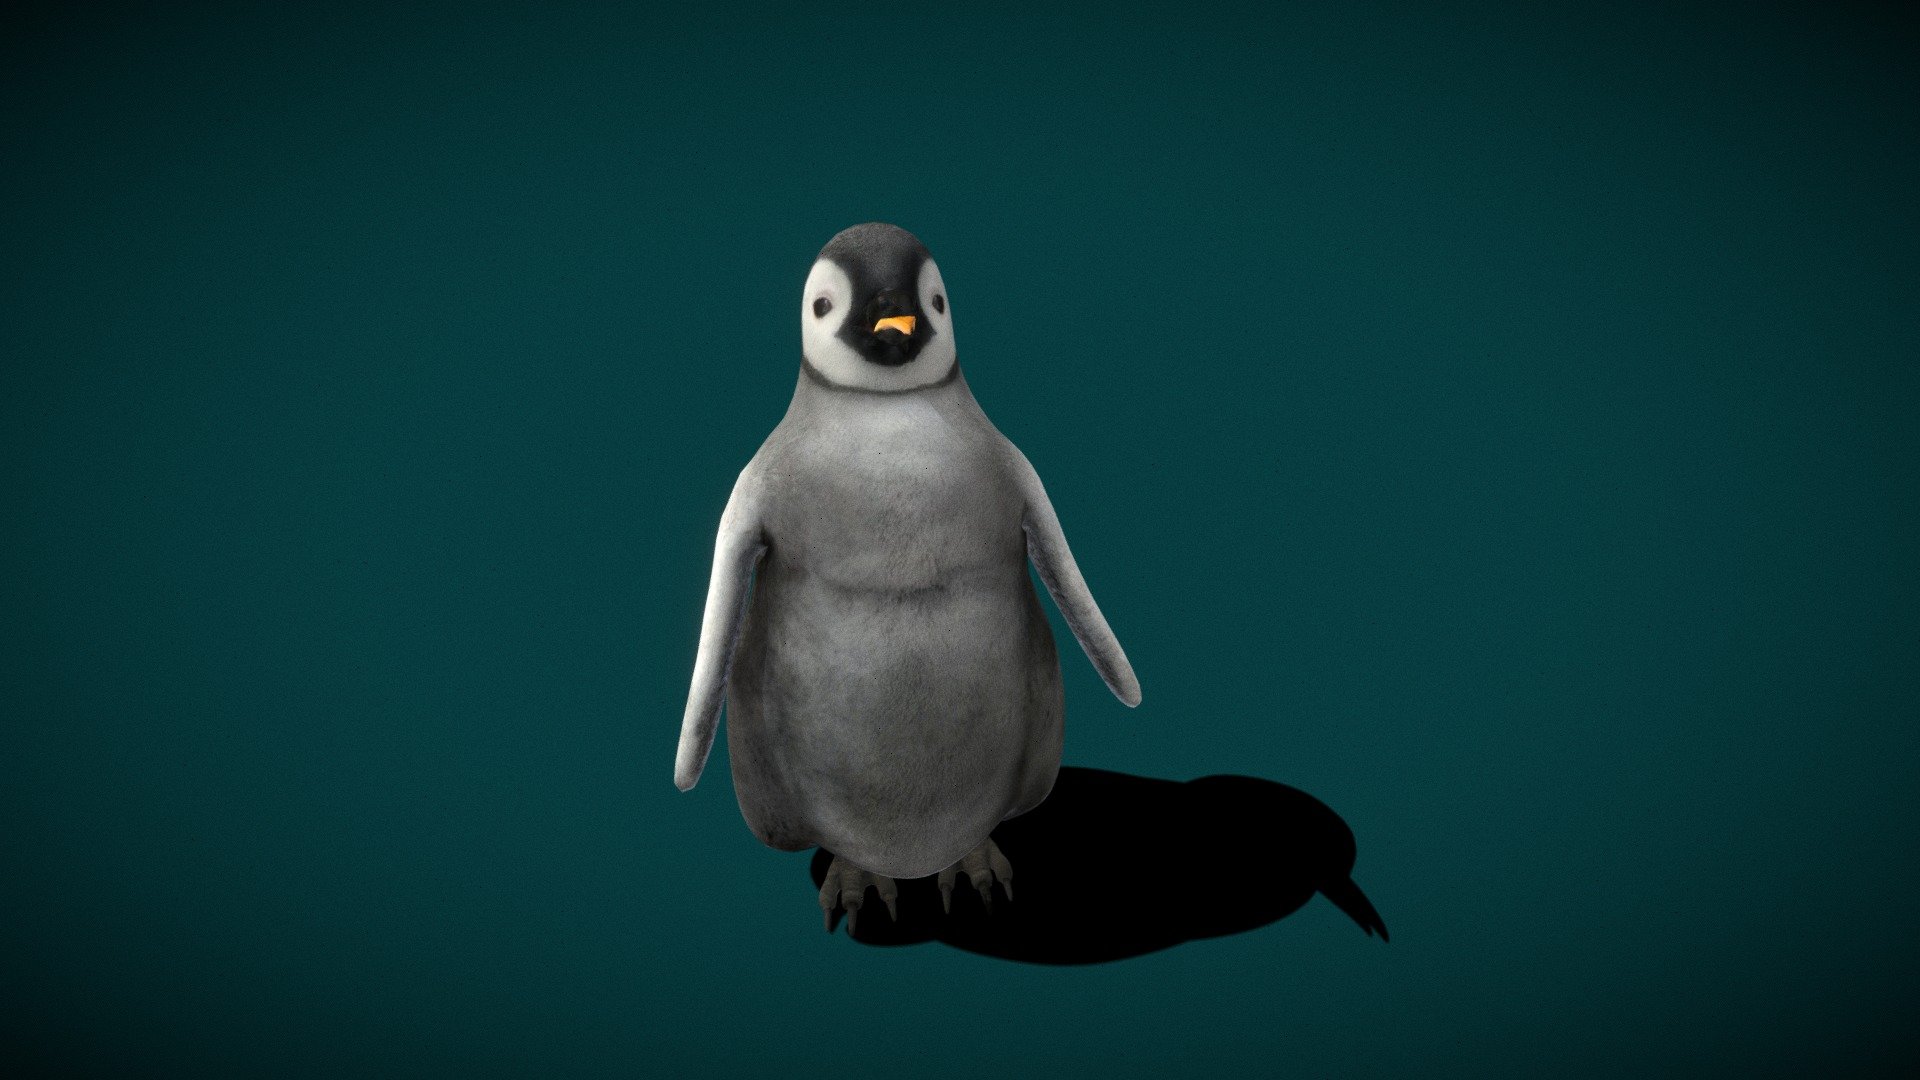 Baby Emperor Penguin




4K PBR Textures 

Idle Loops Animations

The emperor penguin is the tallest and heaviest of all living penguin species and is endemic to Antarctica. The male and female are similar in plumage and size, reaching 100 cm in length and weighing from 22 to 45 kg. Wikipedia
Height: 1.1 – 1.3 m (Adult)
Mass: 23 kg (Male, Adult, After the breeding season), 23 kg (Female, Adult, After the breeding season)
Scientific name: Aptenodytes forsteri
Conservation status: Near Threatened (Population stable) Encyclopedia of Life
Domain: Eukaryota
Family: Spheniscidae
Kingdom: Animalia - Emperor Penguin Baby - 3D model by Nyilonelycompany 3d model